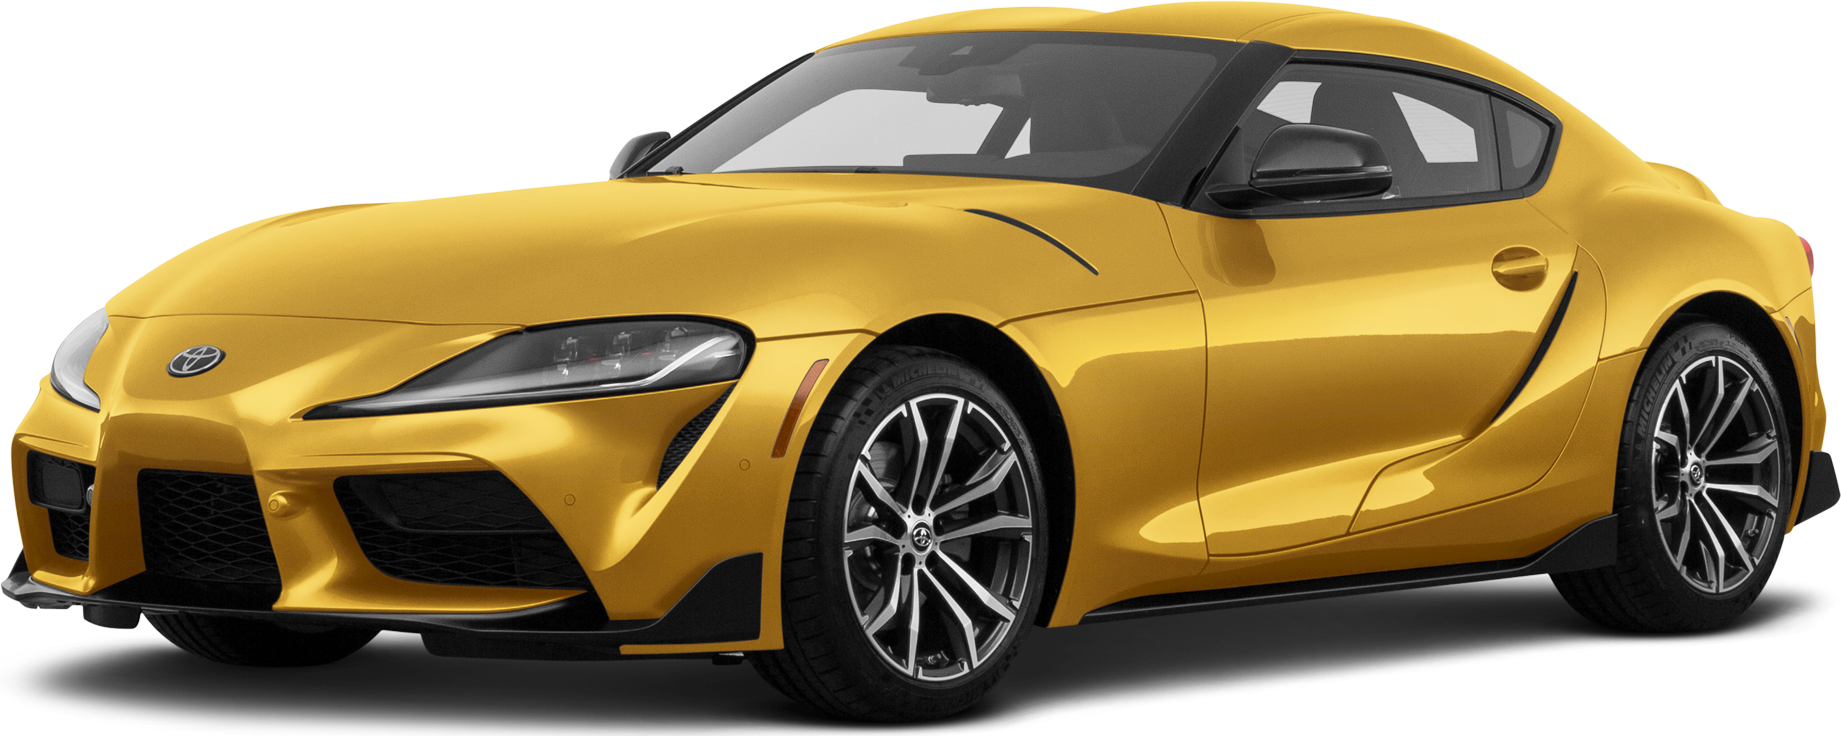 11 reasons why we need a new Toyota Supra